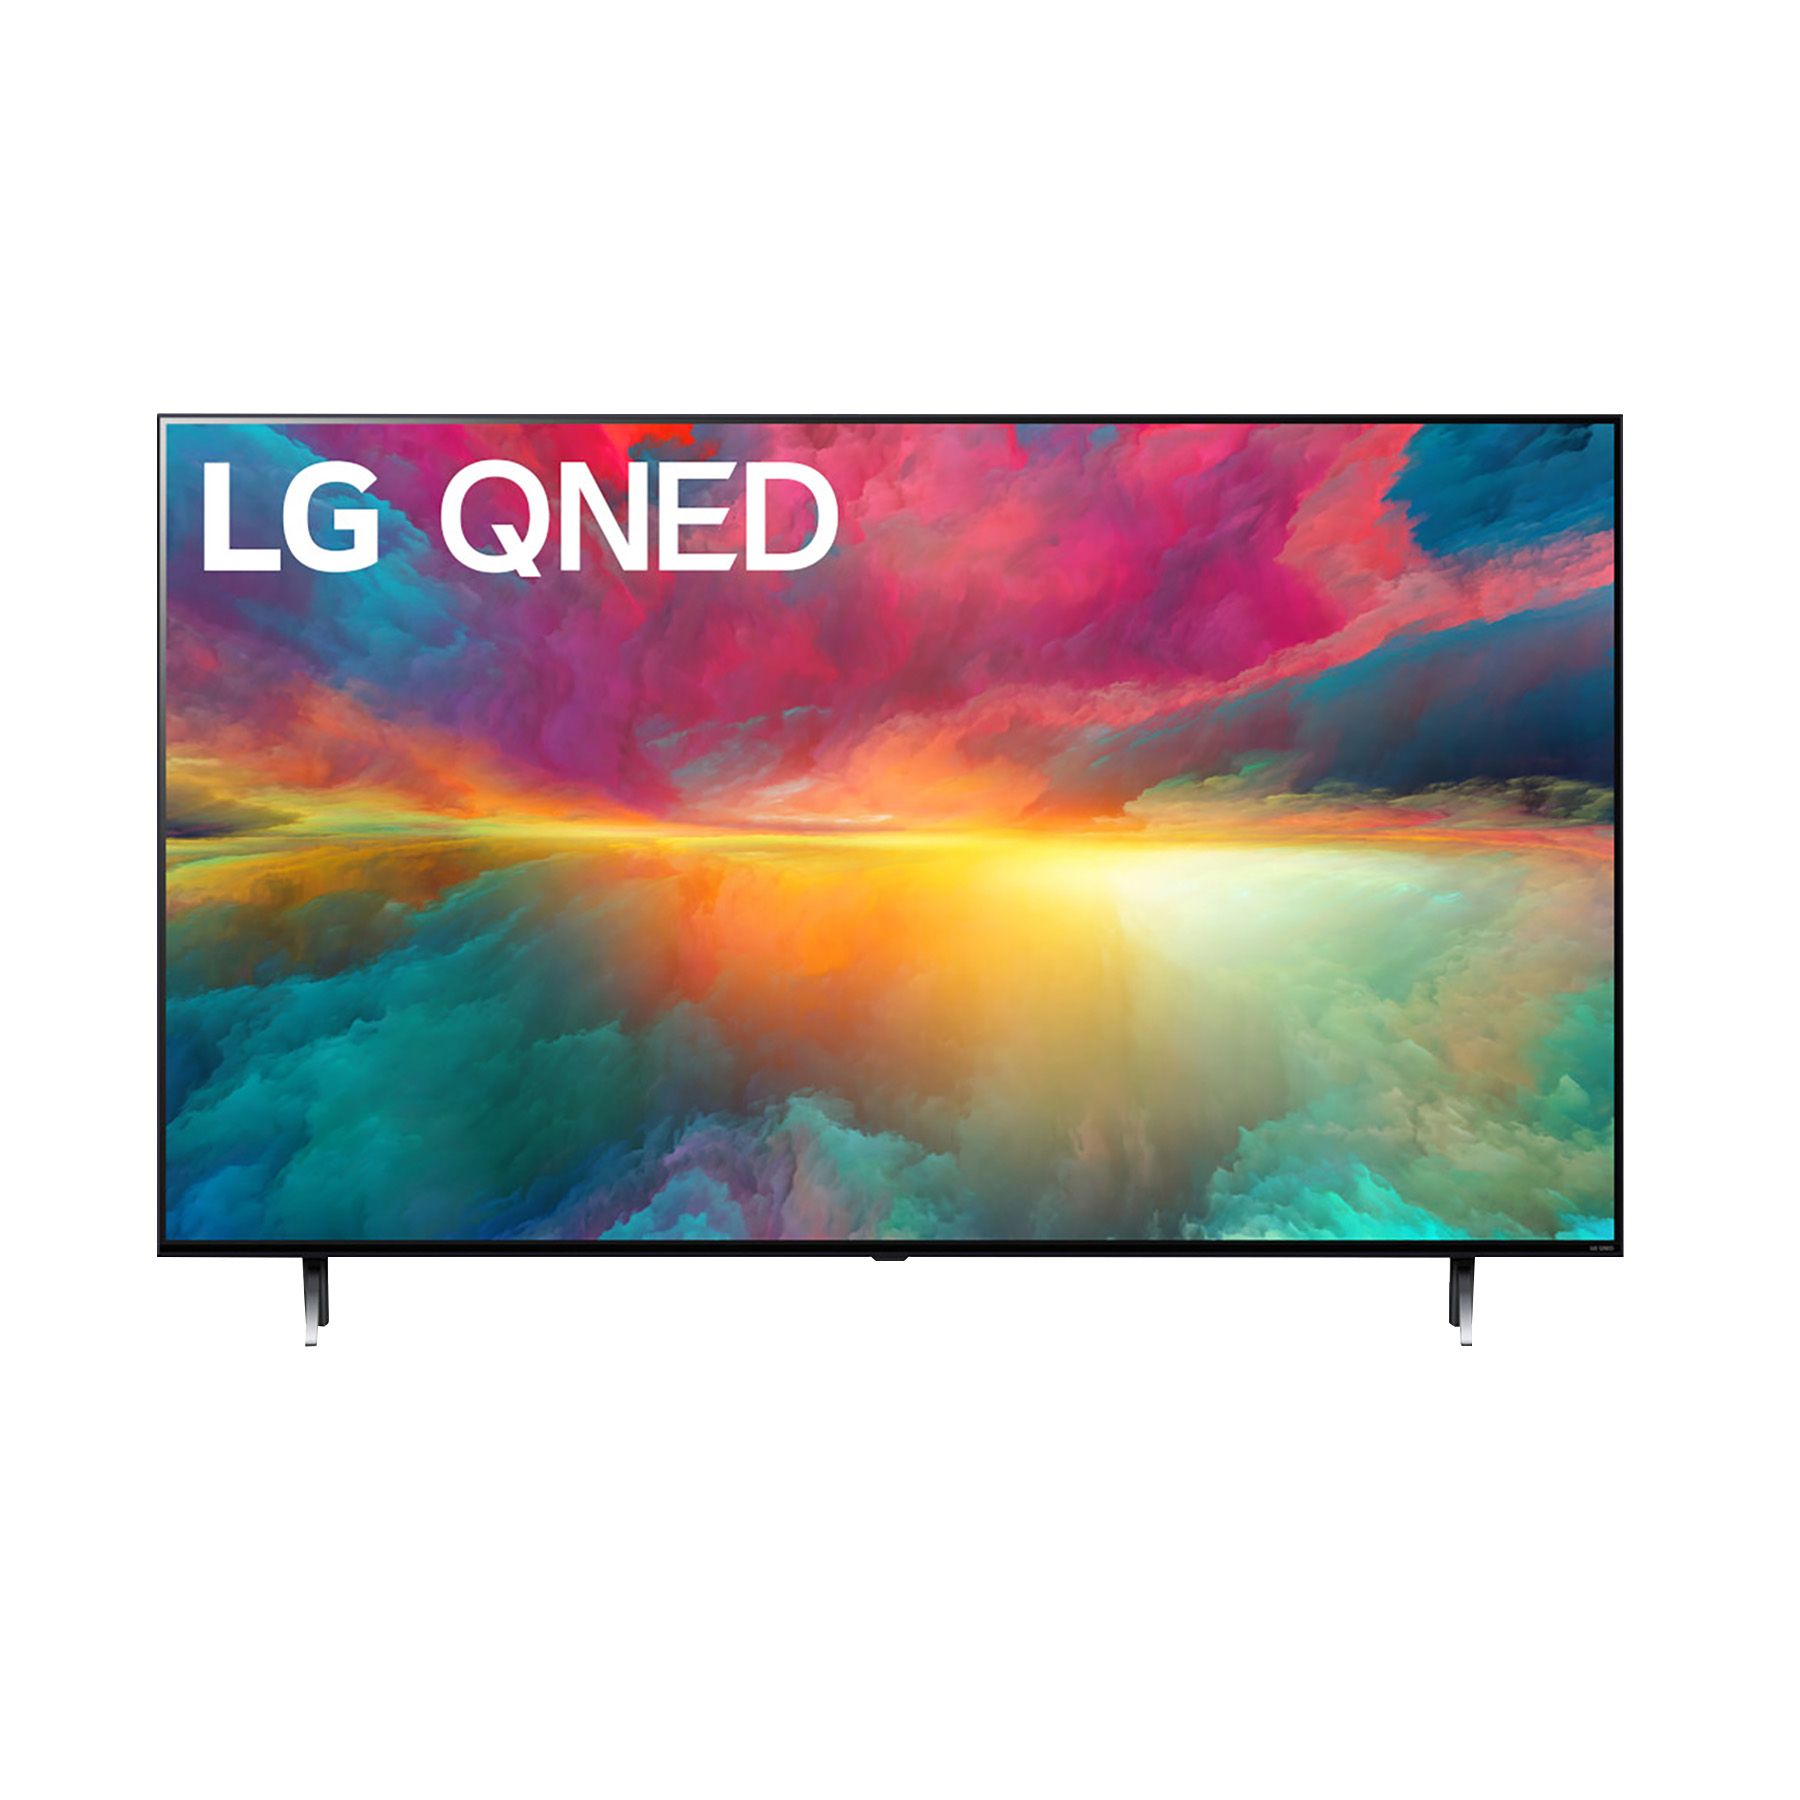 LG QNED 75 İnç: A Review of LG's New Enormous Television — Eightify